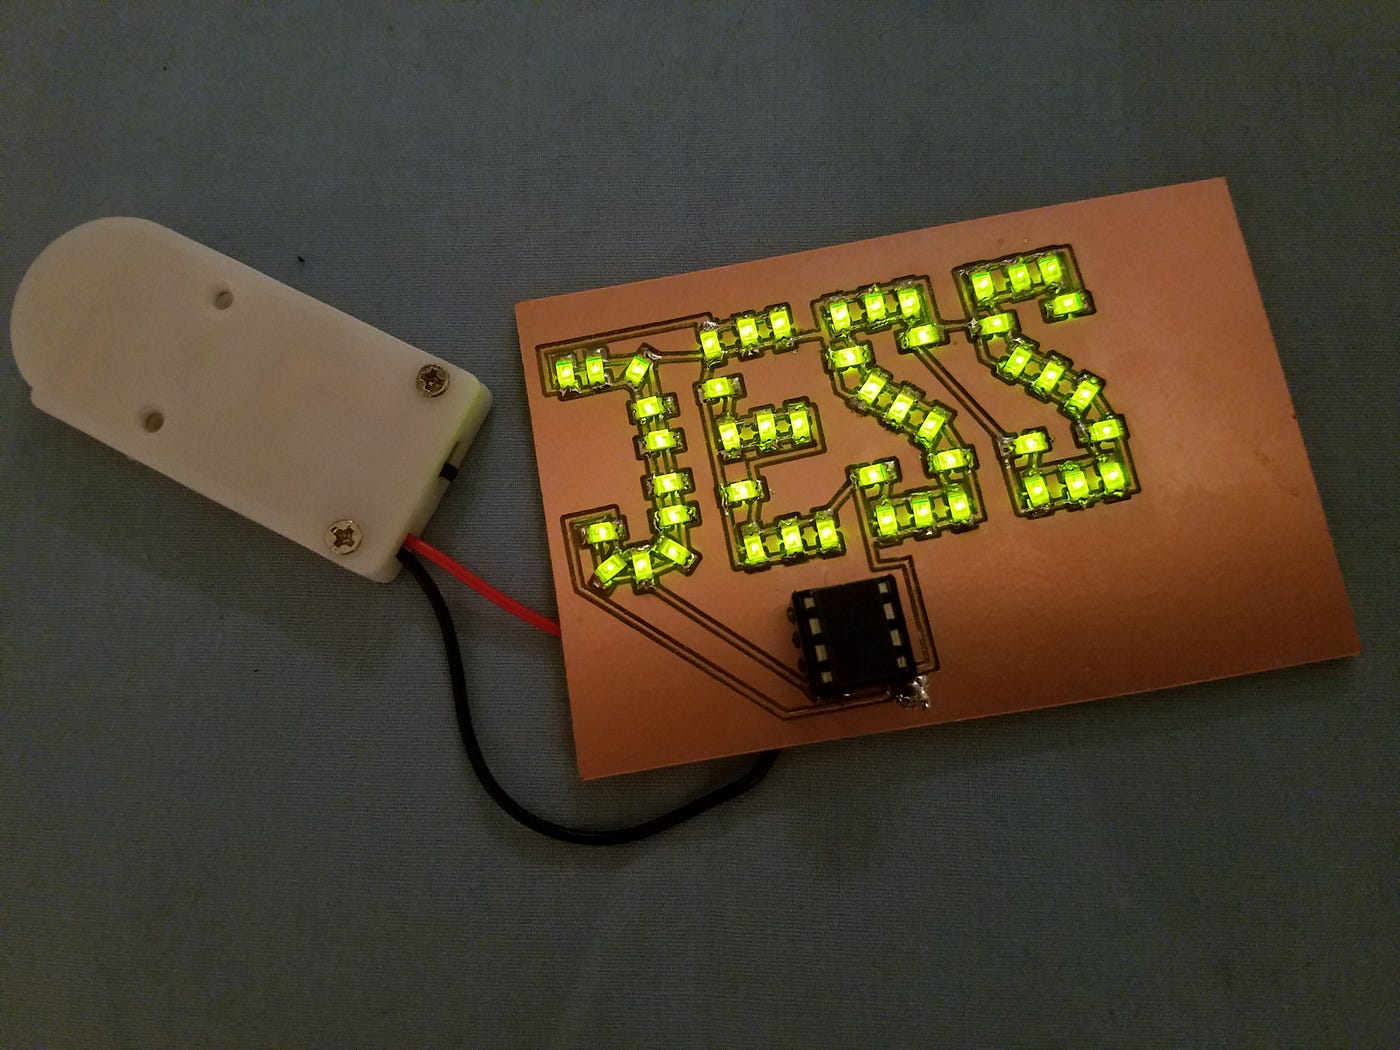 How to Design, Mill, Populate, and Program an LED Name Tag | by Jessica  Hogan | Medium